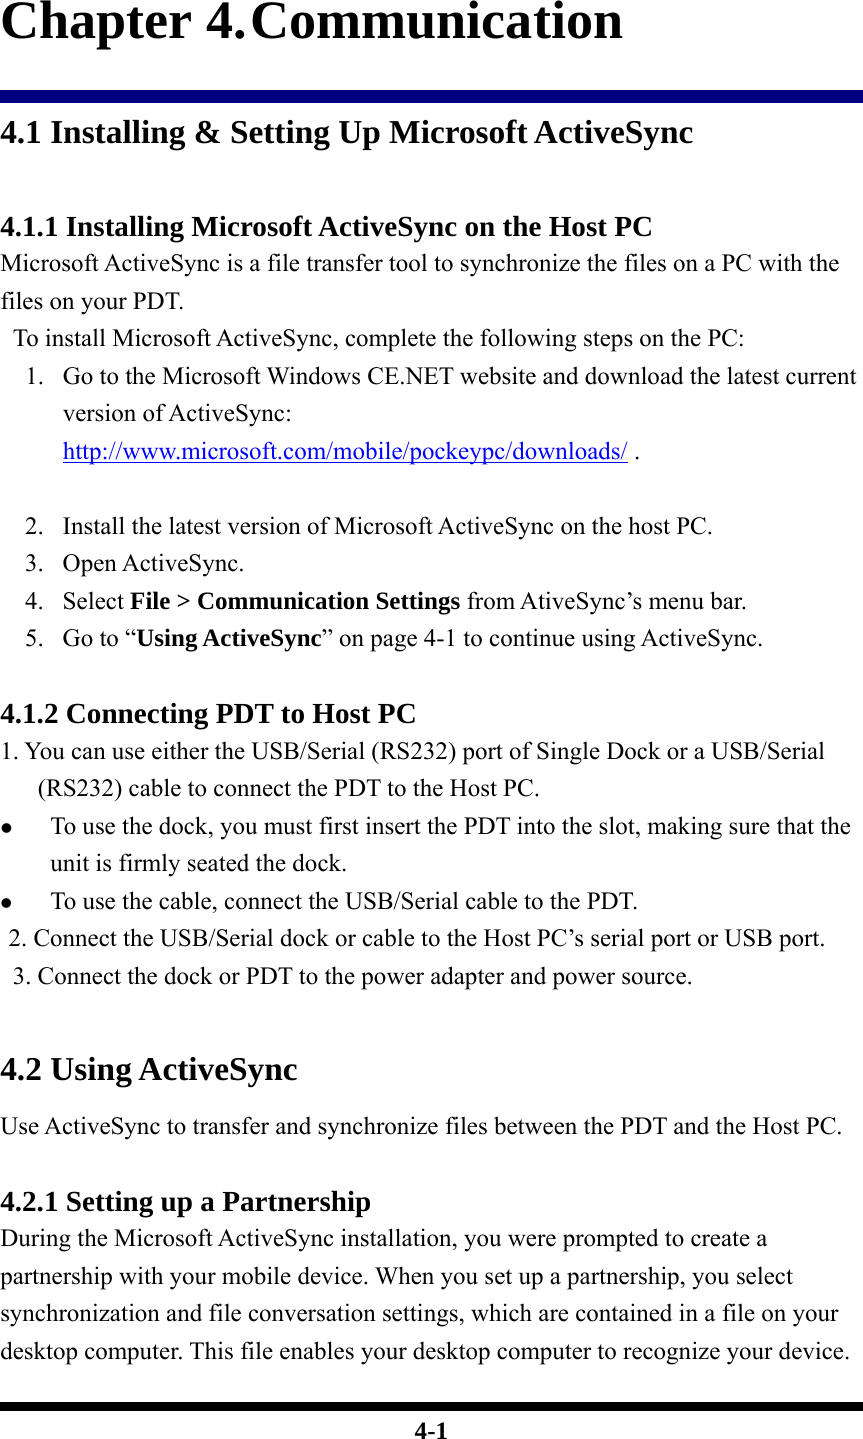  4-1 Chapter 4. Communication 4.1 Installing &amp; Setting Up Microsoft ActiveSync  4.1.1 Installing Microsoft ActiveSync on the Host PC Microsoft ActiveSync is a file transfer tool to synchronize the files on a PC with the files on your PDT.     To install Microsoft ActiveSync, complete the following steps on the PC: 1. Go to the Microsoft Windows CE.NET website and download the latest current version of ActiveSync: http://www.microsoft.com/mobile/pockeypc/downloads/ .     2. Install the latest version of Microsoft ActiveSync on the host PC. 3. Open ActiveSync. 4. Select File &gt; Communication Settings from AtiveSync’s menu bar. 5. Go to “Using ActiveSync” on page 4-1 to continue using ActiveSync.  4.1.2 Connecting PDT to Host PC 1. You can use either the USB/Serial (RS232) port of Single Dock or a USB/Serial (RS232) cable to connect the PDT to the Host PC. z To use the dock, you must first insert the PDT into the slot, making sure that the unit is firmly seated the dock. z To use the cable, connect the USB/Serial cable to the PDT.  2. Connect the USB/Serial dock or cable to the Host PC’s serial port or USB port.   3. Connect the dock or PDT to the power adapter and power source.   4.2 Using ActiveSync Use ActiveSync to transfer and synchronize files between the PDT and the Host PC.  4.2.1 Setting up a Partnership During the Microsoft ActiveSync installation, you were prompted to create a partnership with your mobile device. When you set up a partnership, you select synchronization and file conversation settings, which are contained in a file on your desktop computer. This file enables your desktop computer to recognize your device. 